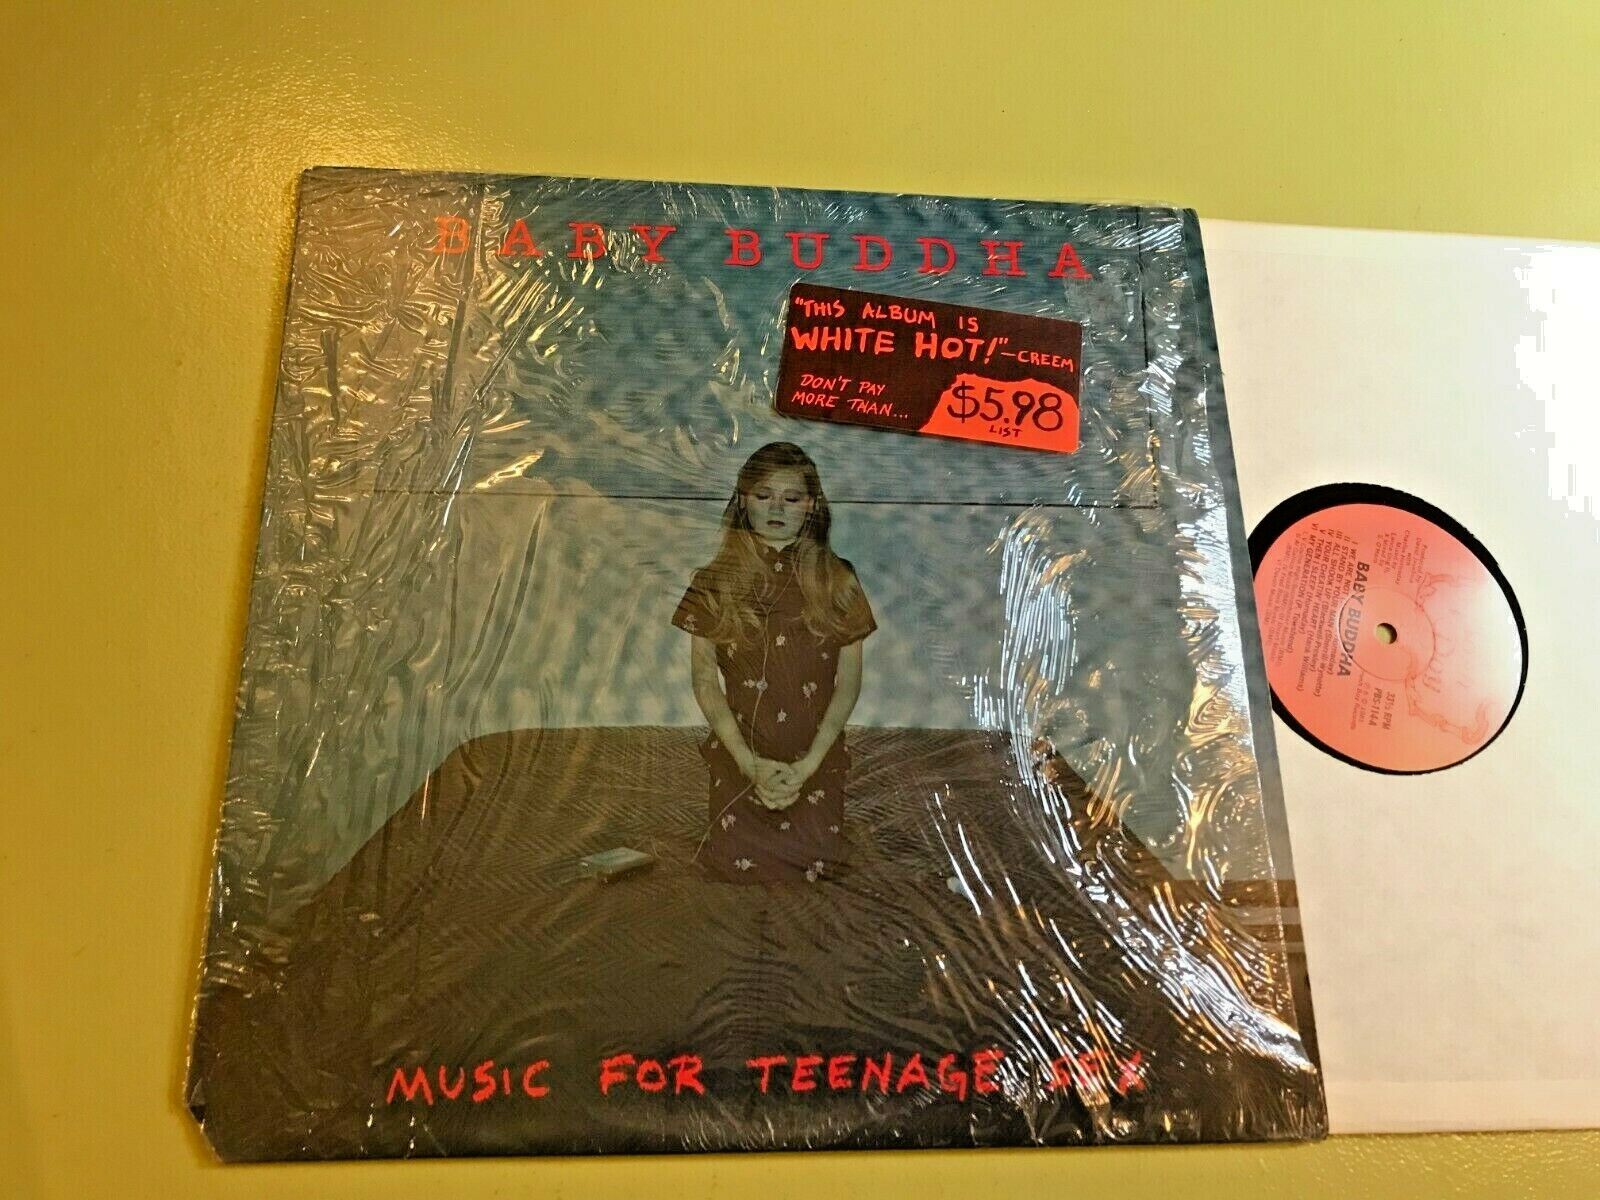 BABY BUDDHA MUSIC FOR TEENAGE SEX LP \'81 los microwaves synth punk w/shrink rare